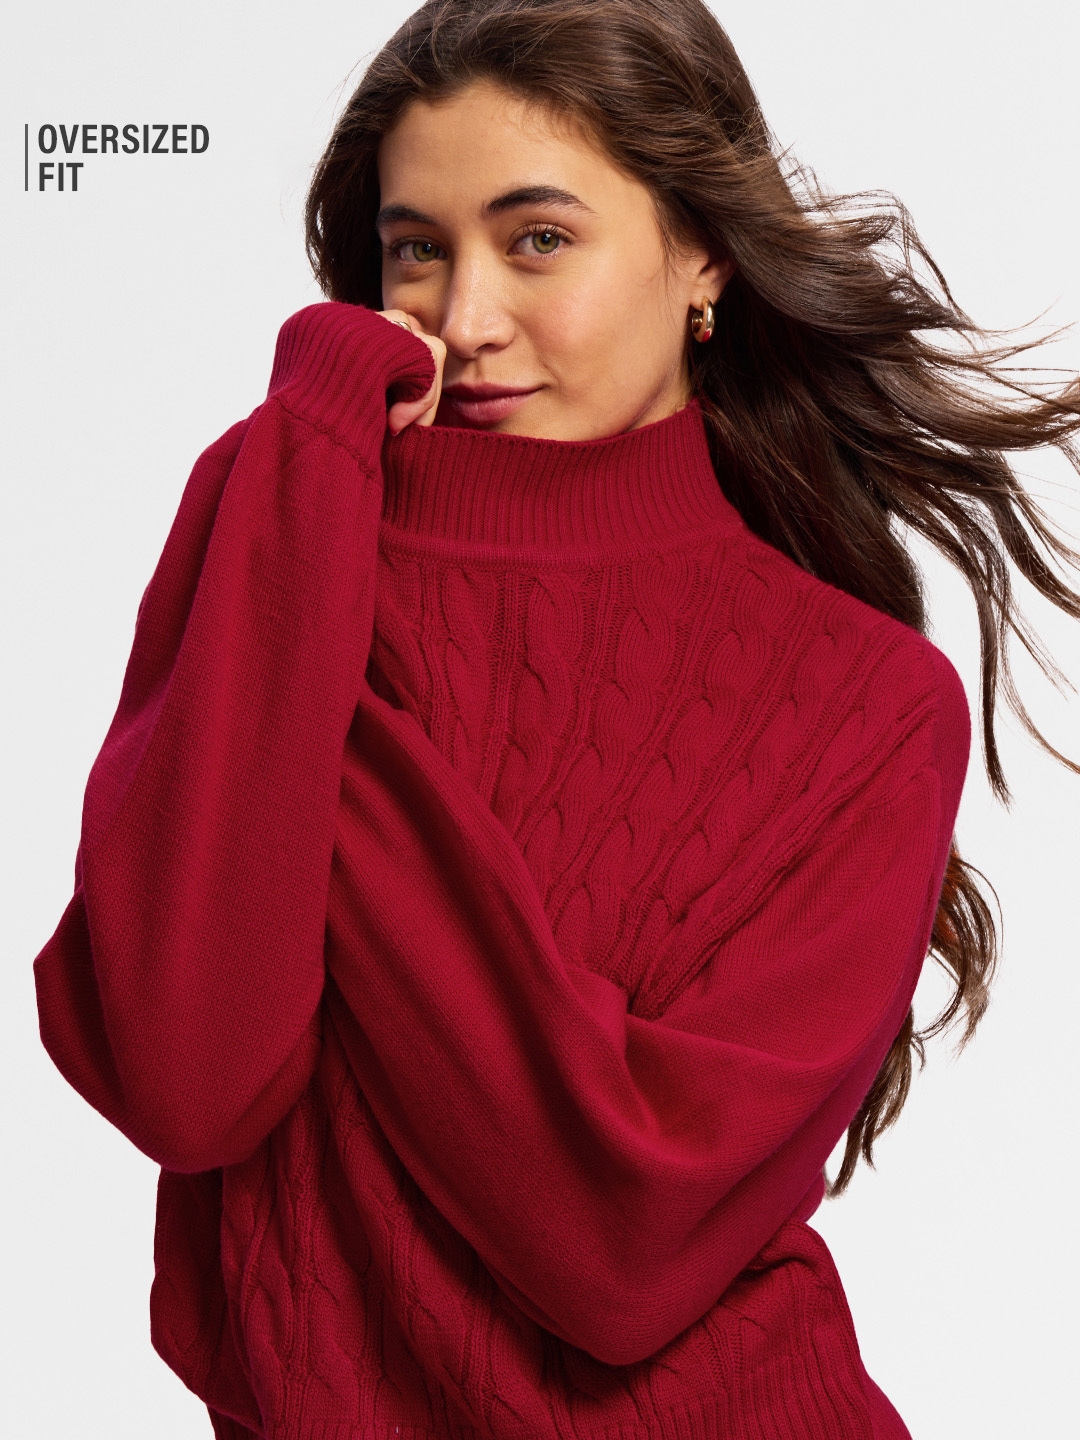 The Souled Store | Women's Solids: Poppy Red Women's Oversized Sweaters